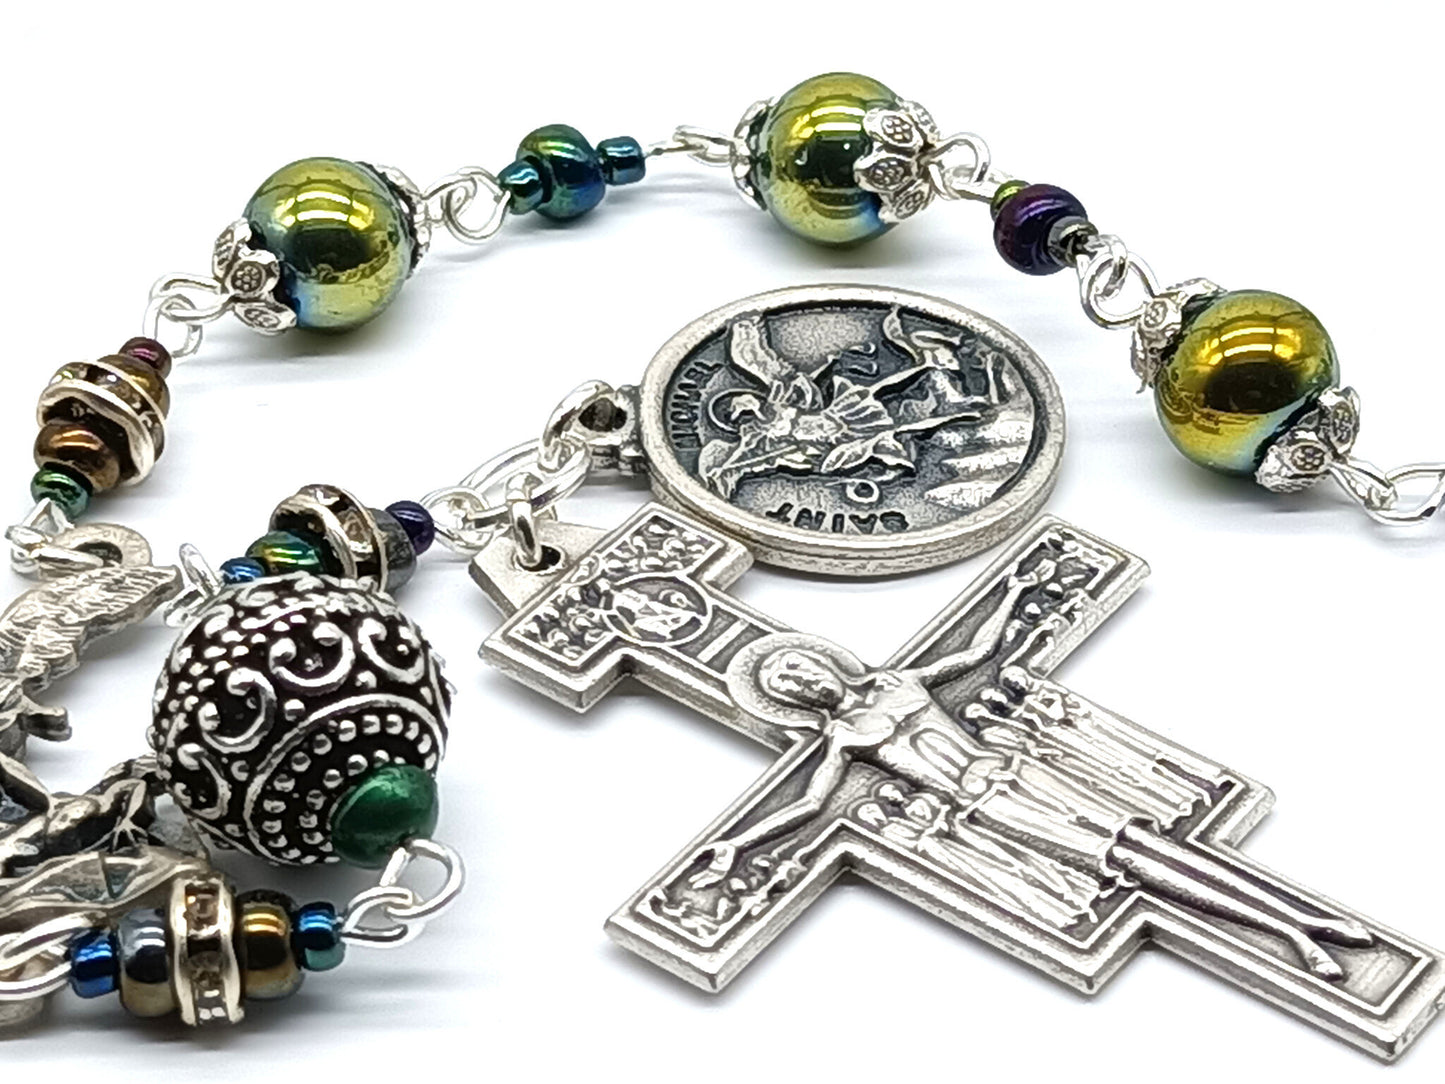 Saint Michael unique rosary beads single decade with green hematite beads, silver St. Francis crucifix, St. Michael centre medal and small medal.